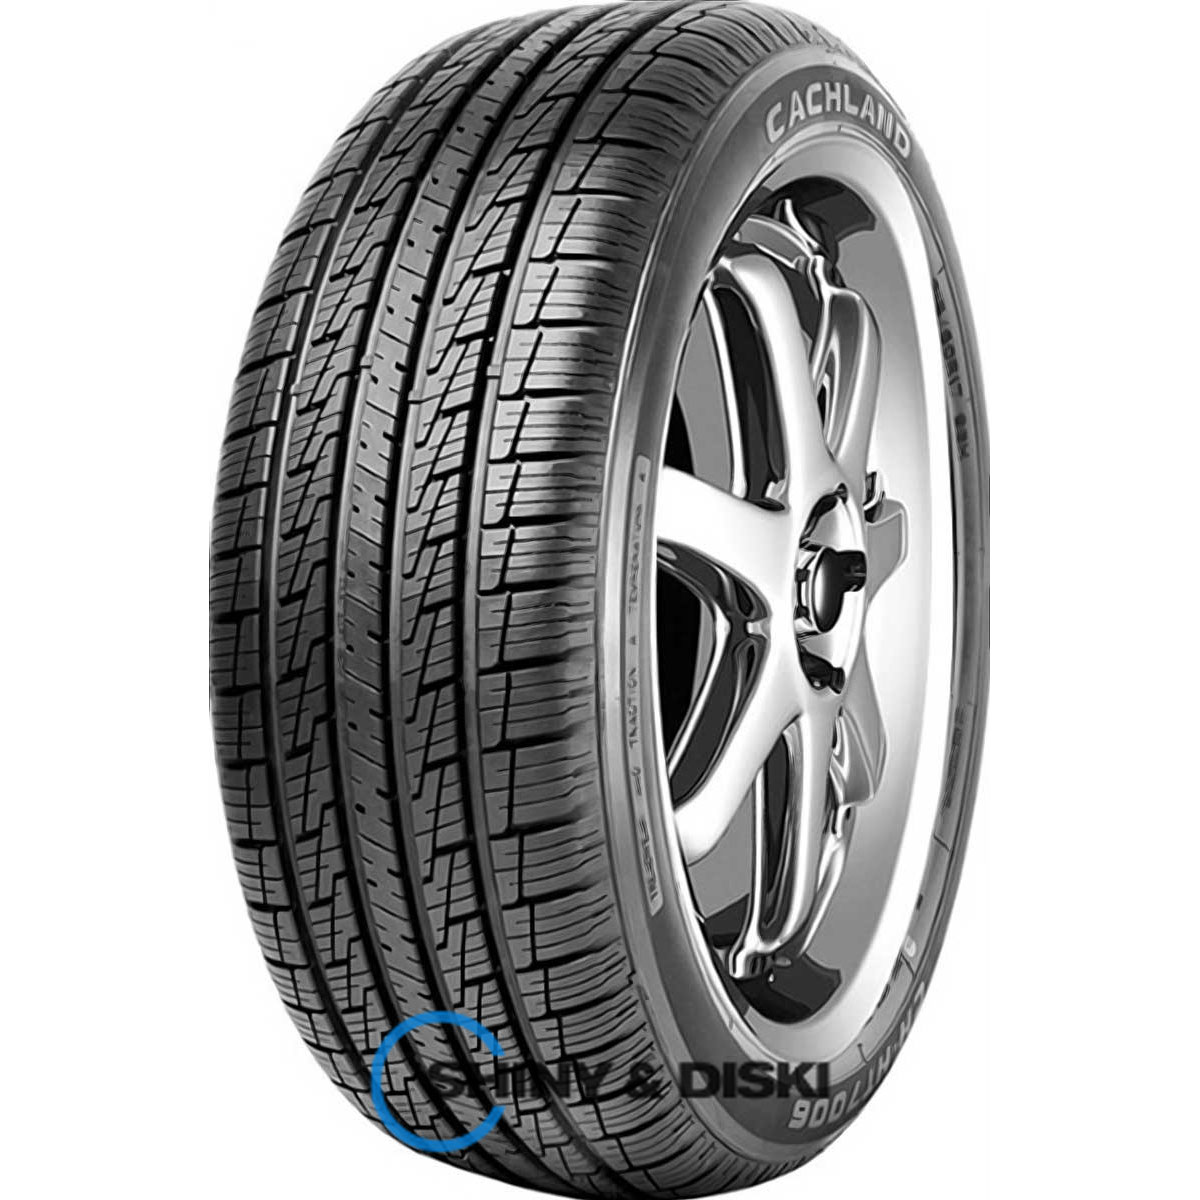 cachland ch-ht7006 215/60 r17 96h